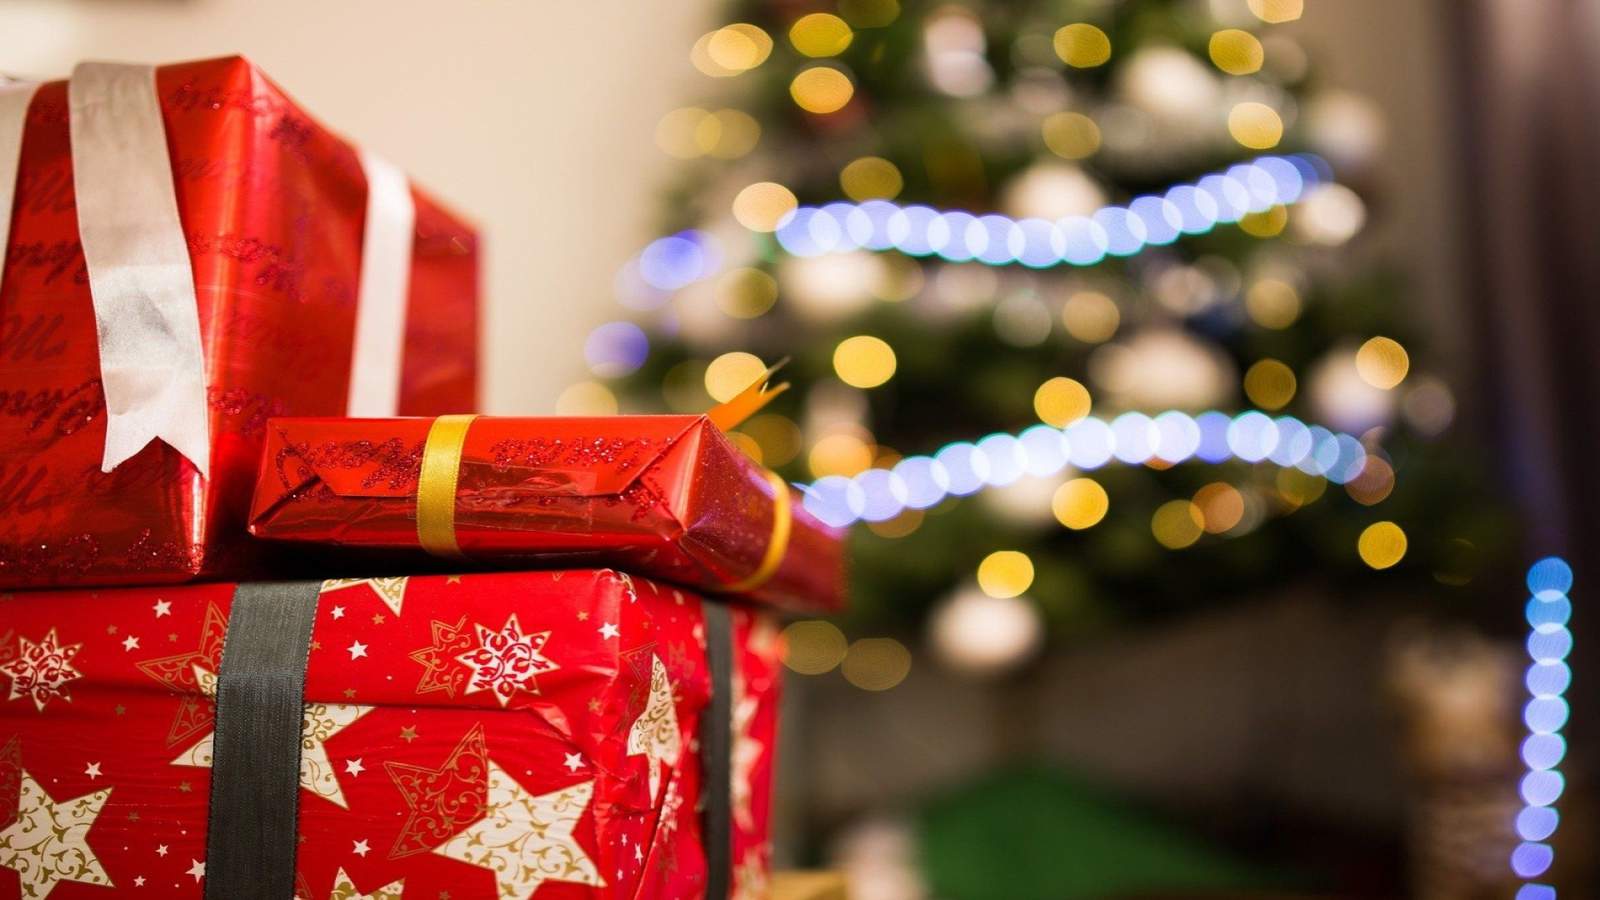 Shipping deadlines: This is when you need to send your packages for arrival by Christmas